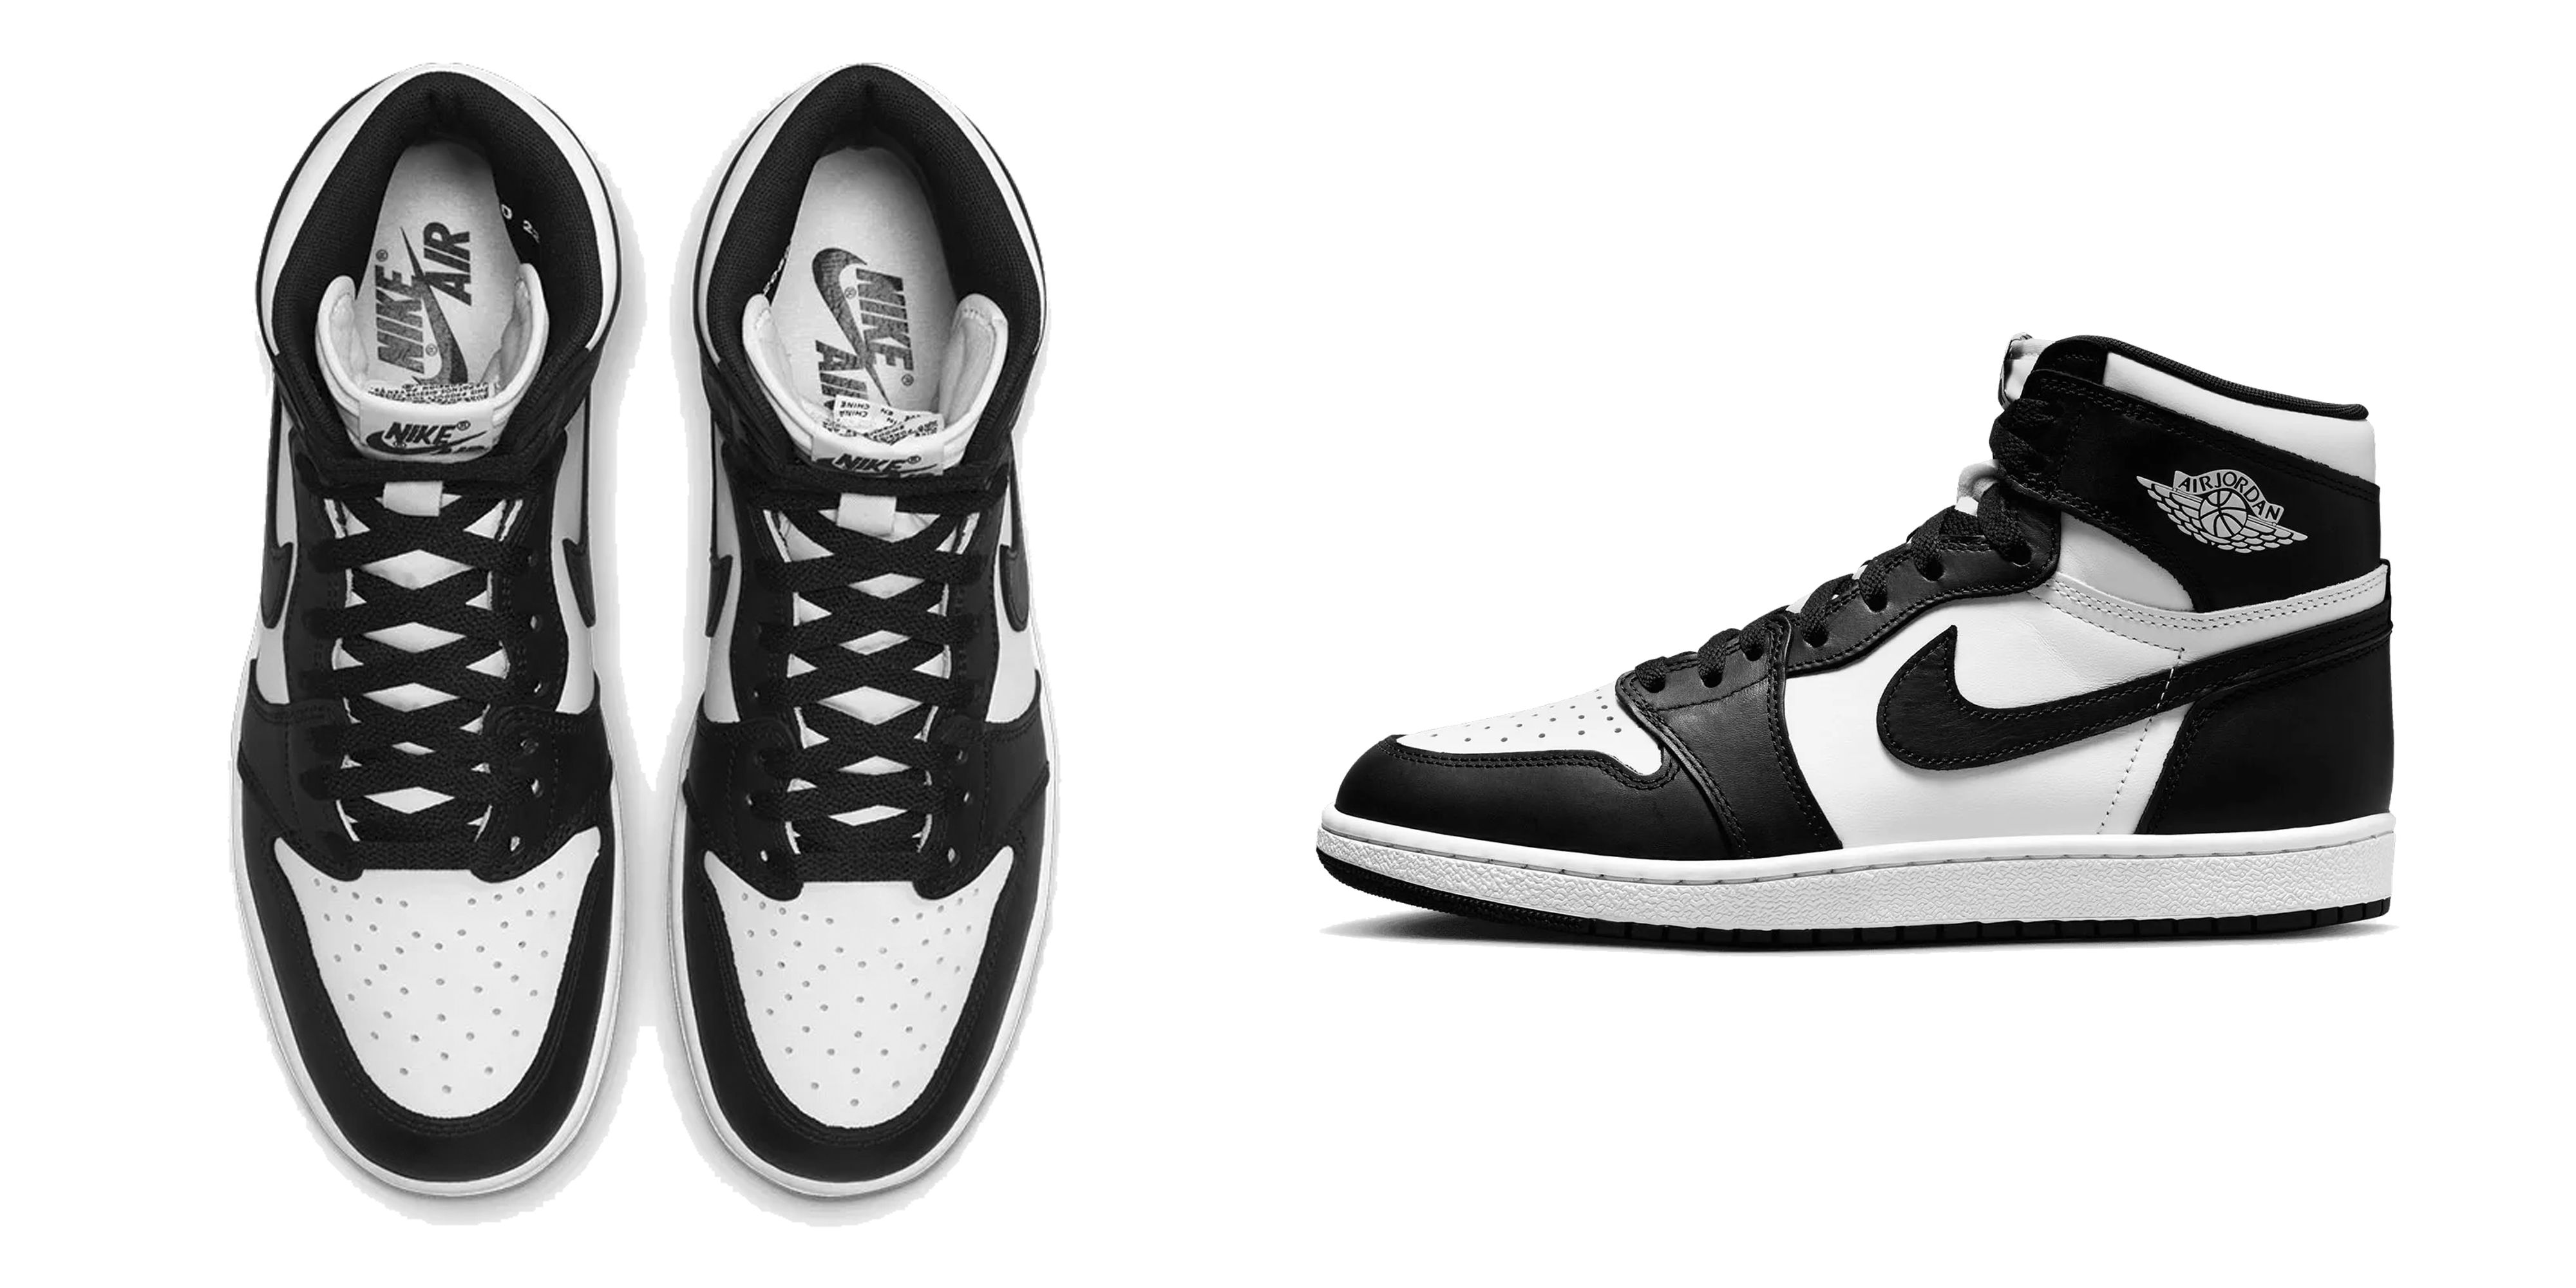 The Air Jordan 1 High ‘85 ‘Black/White’ Is About to Drop. Here’s ...